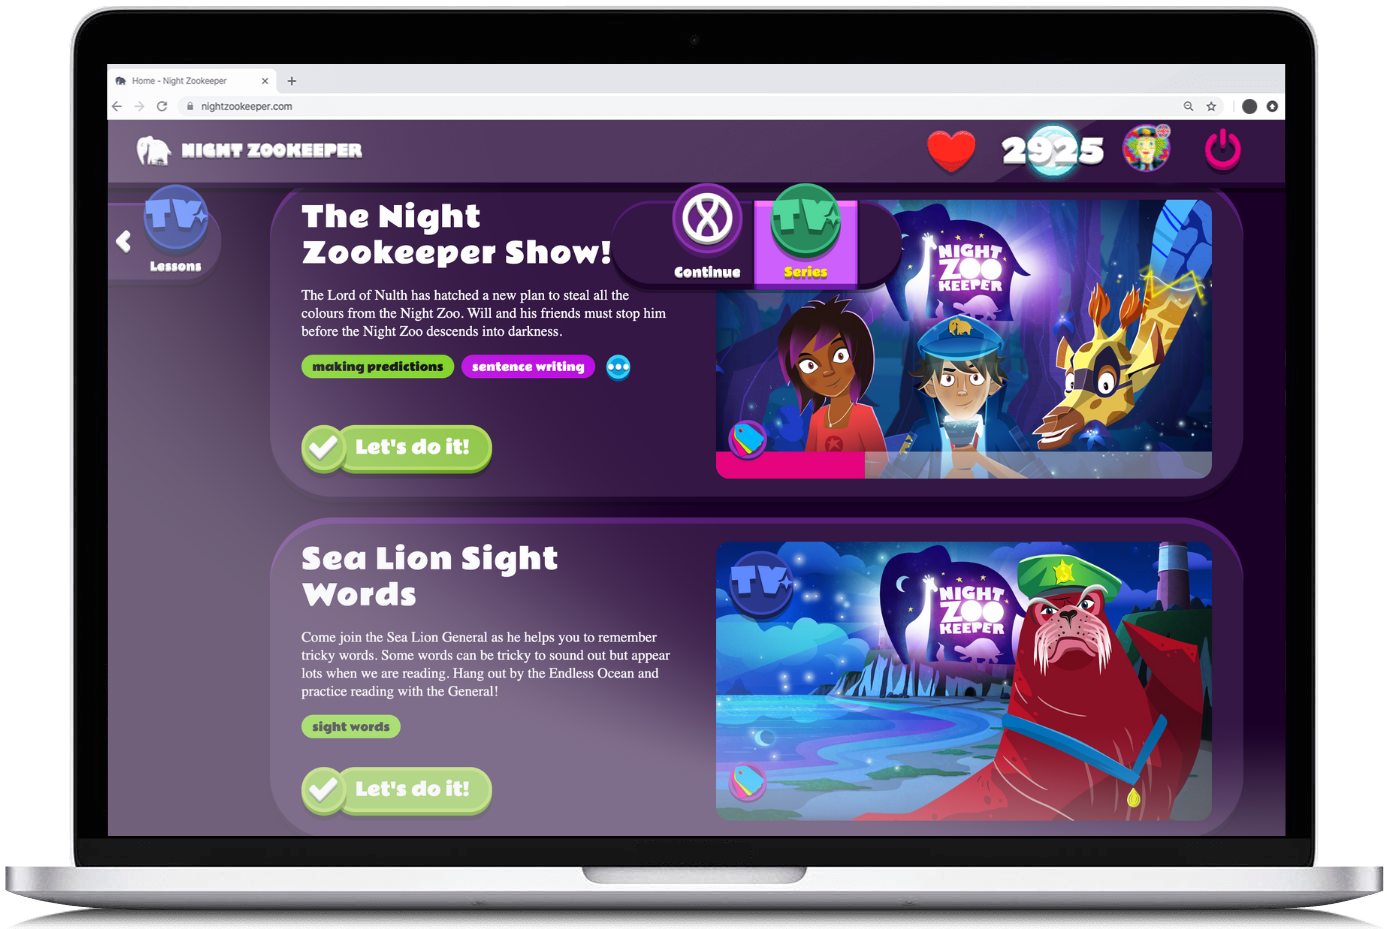 Sight Words lesson on Nightzookeeper.com